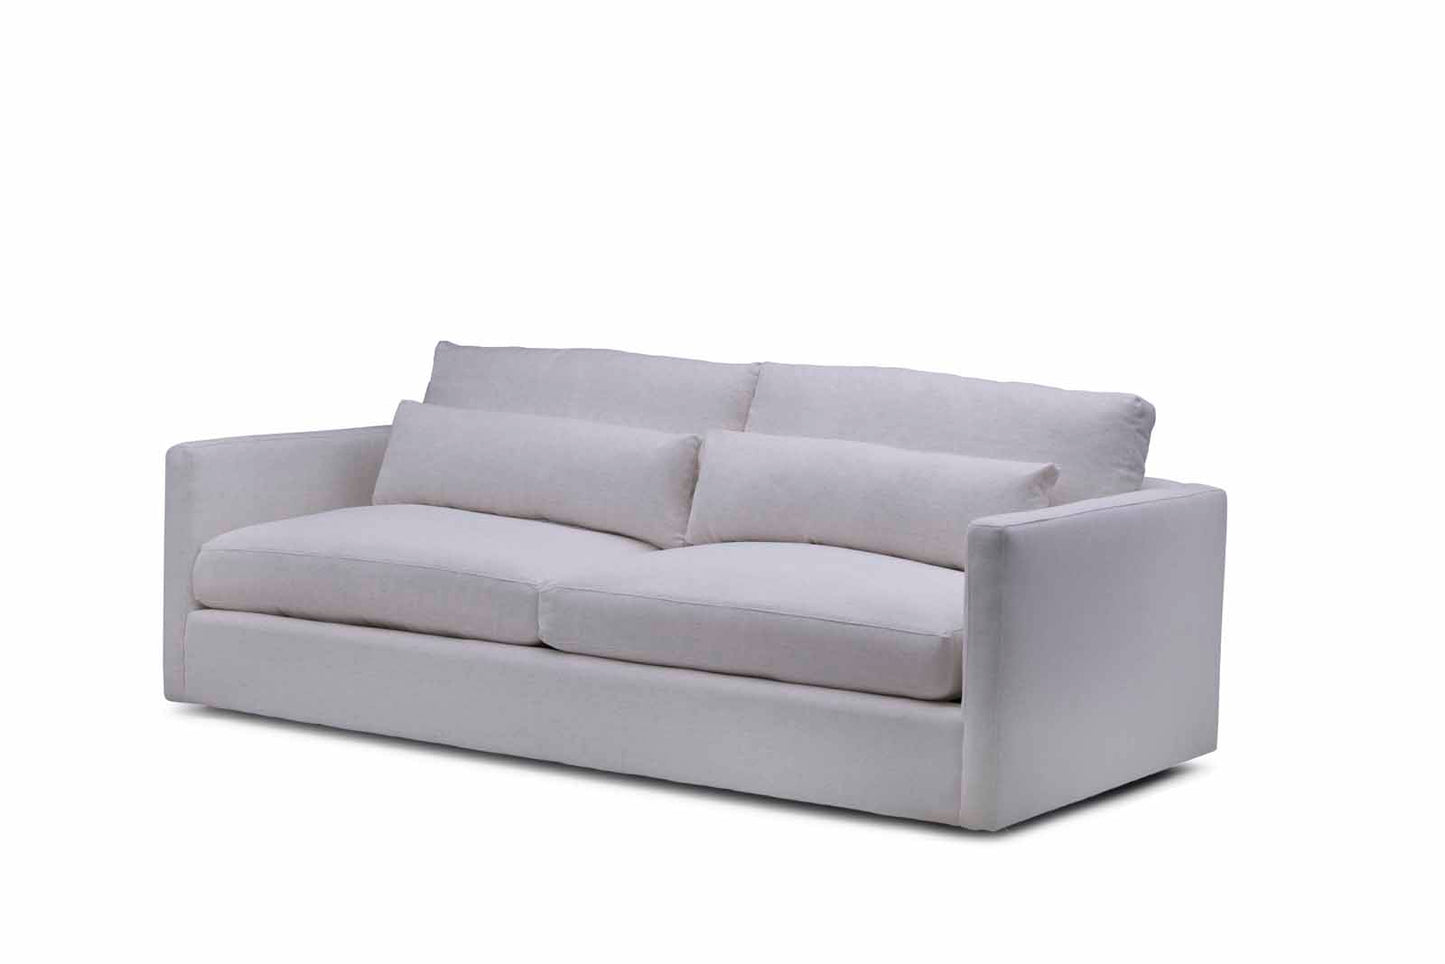 Emory 2-Seat Sofa in Nomad Snow